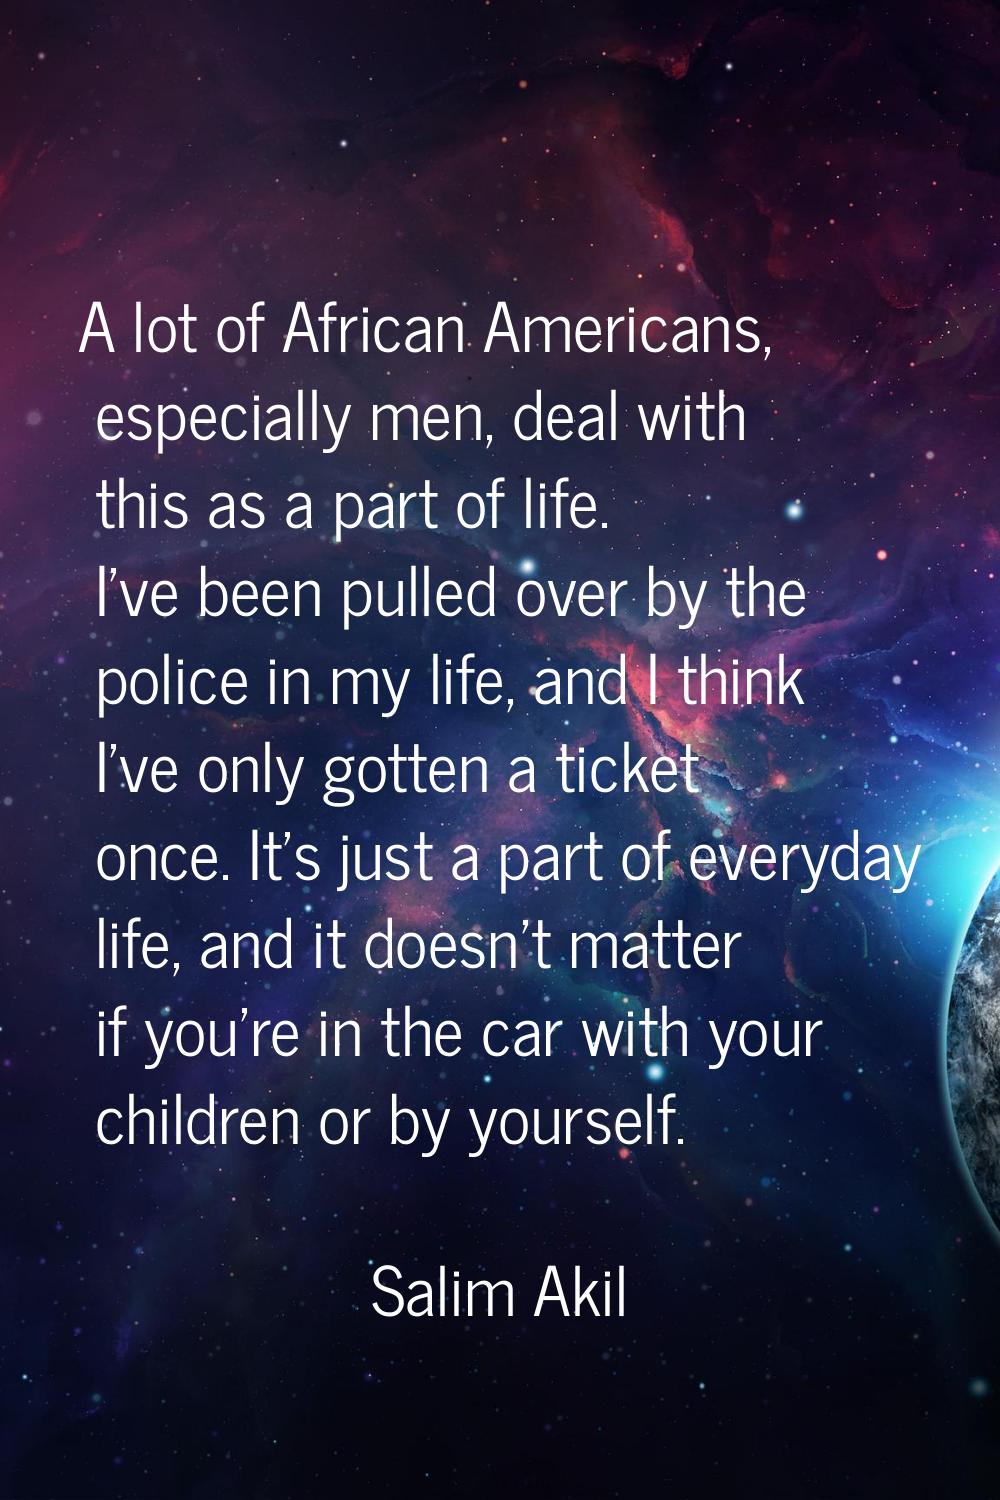 A lot of African Americans, especially men, deal with this as a part of life. I've been pulled over